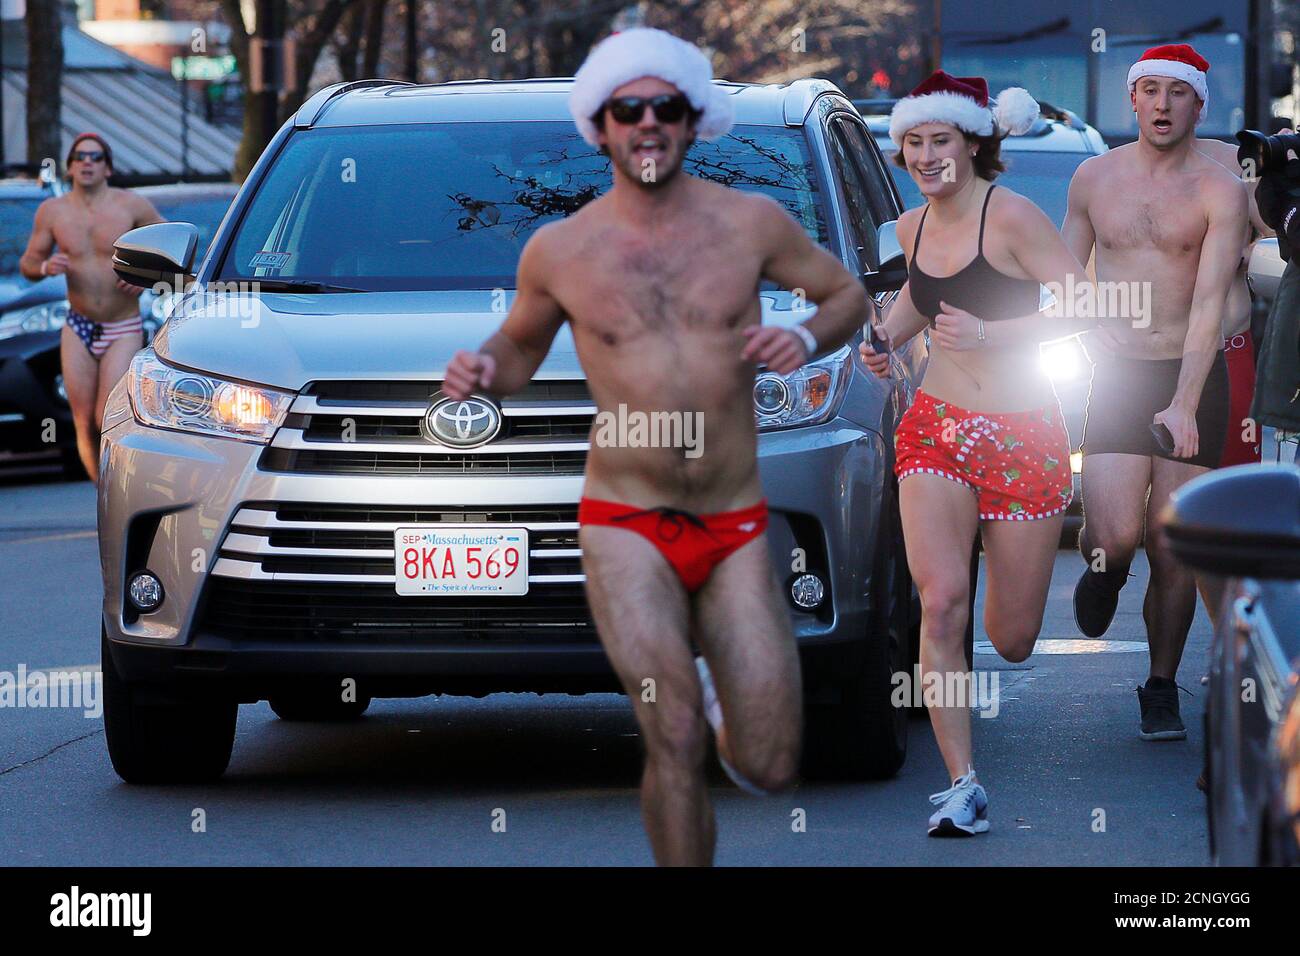 Santa Speedo High Resolution Stock Photography and Images - Alamy